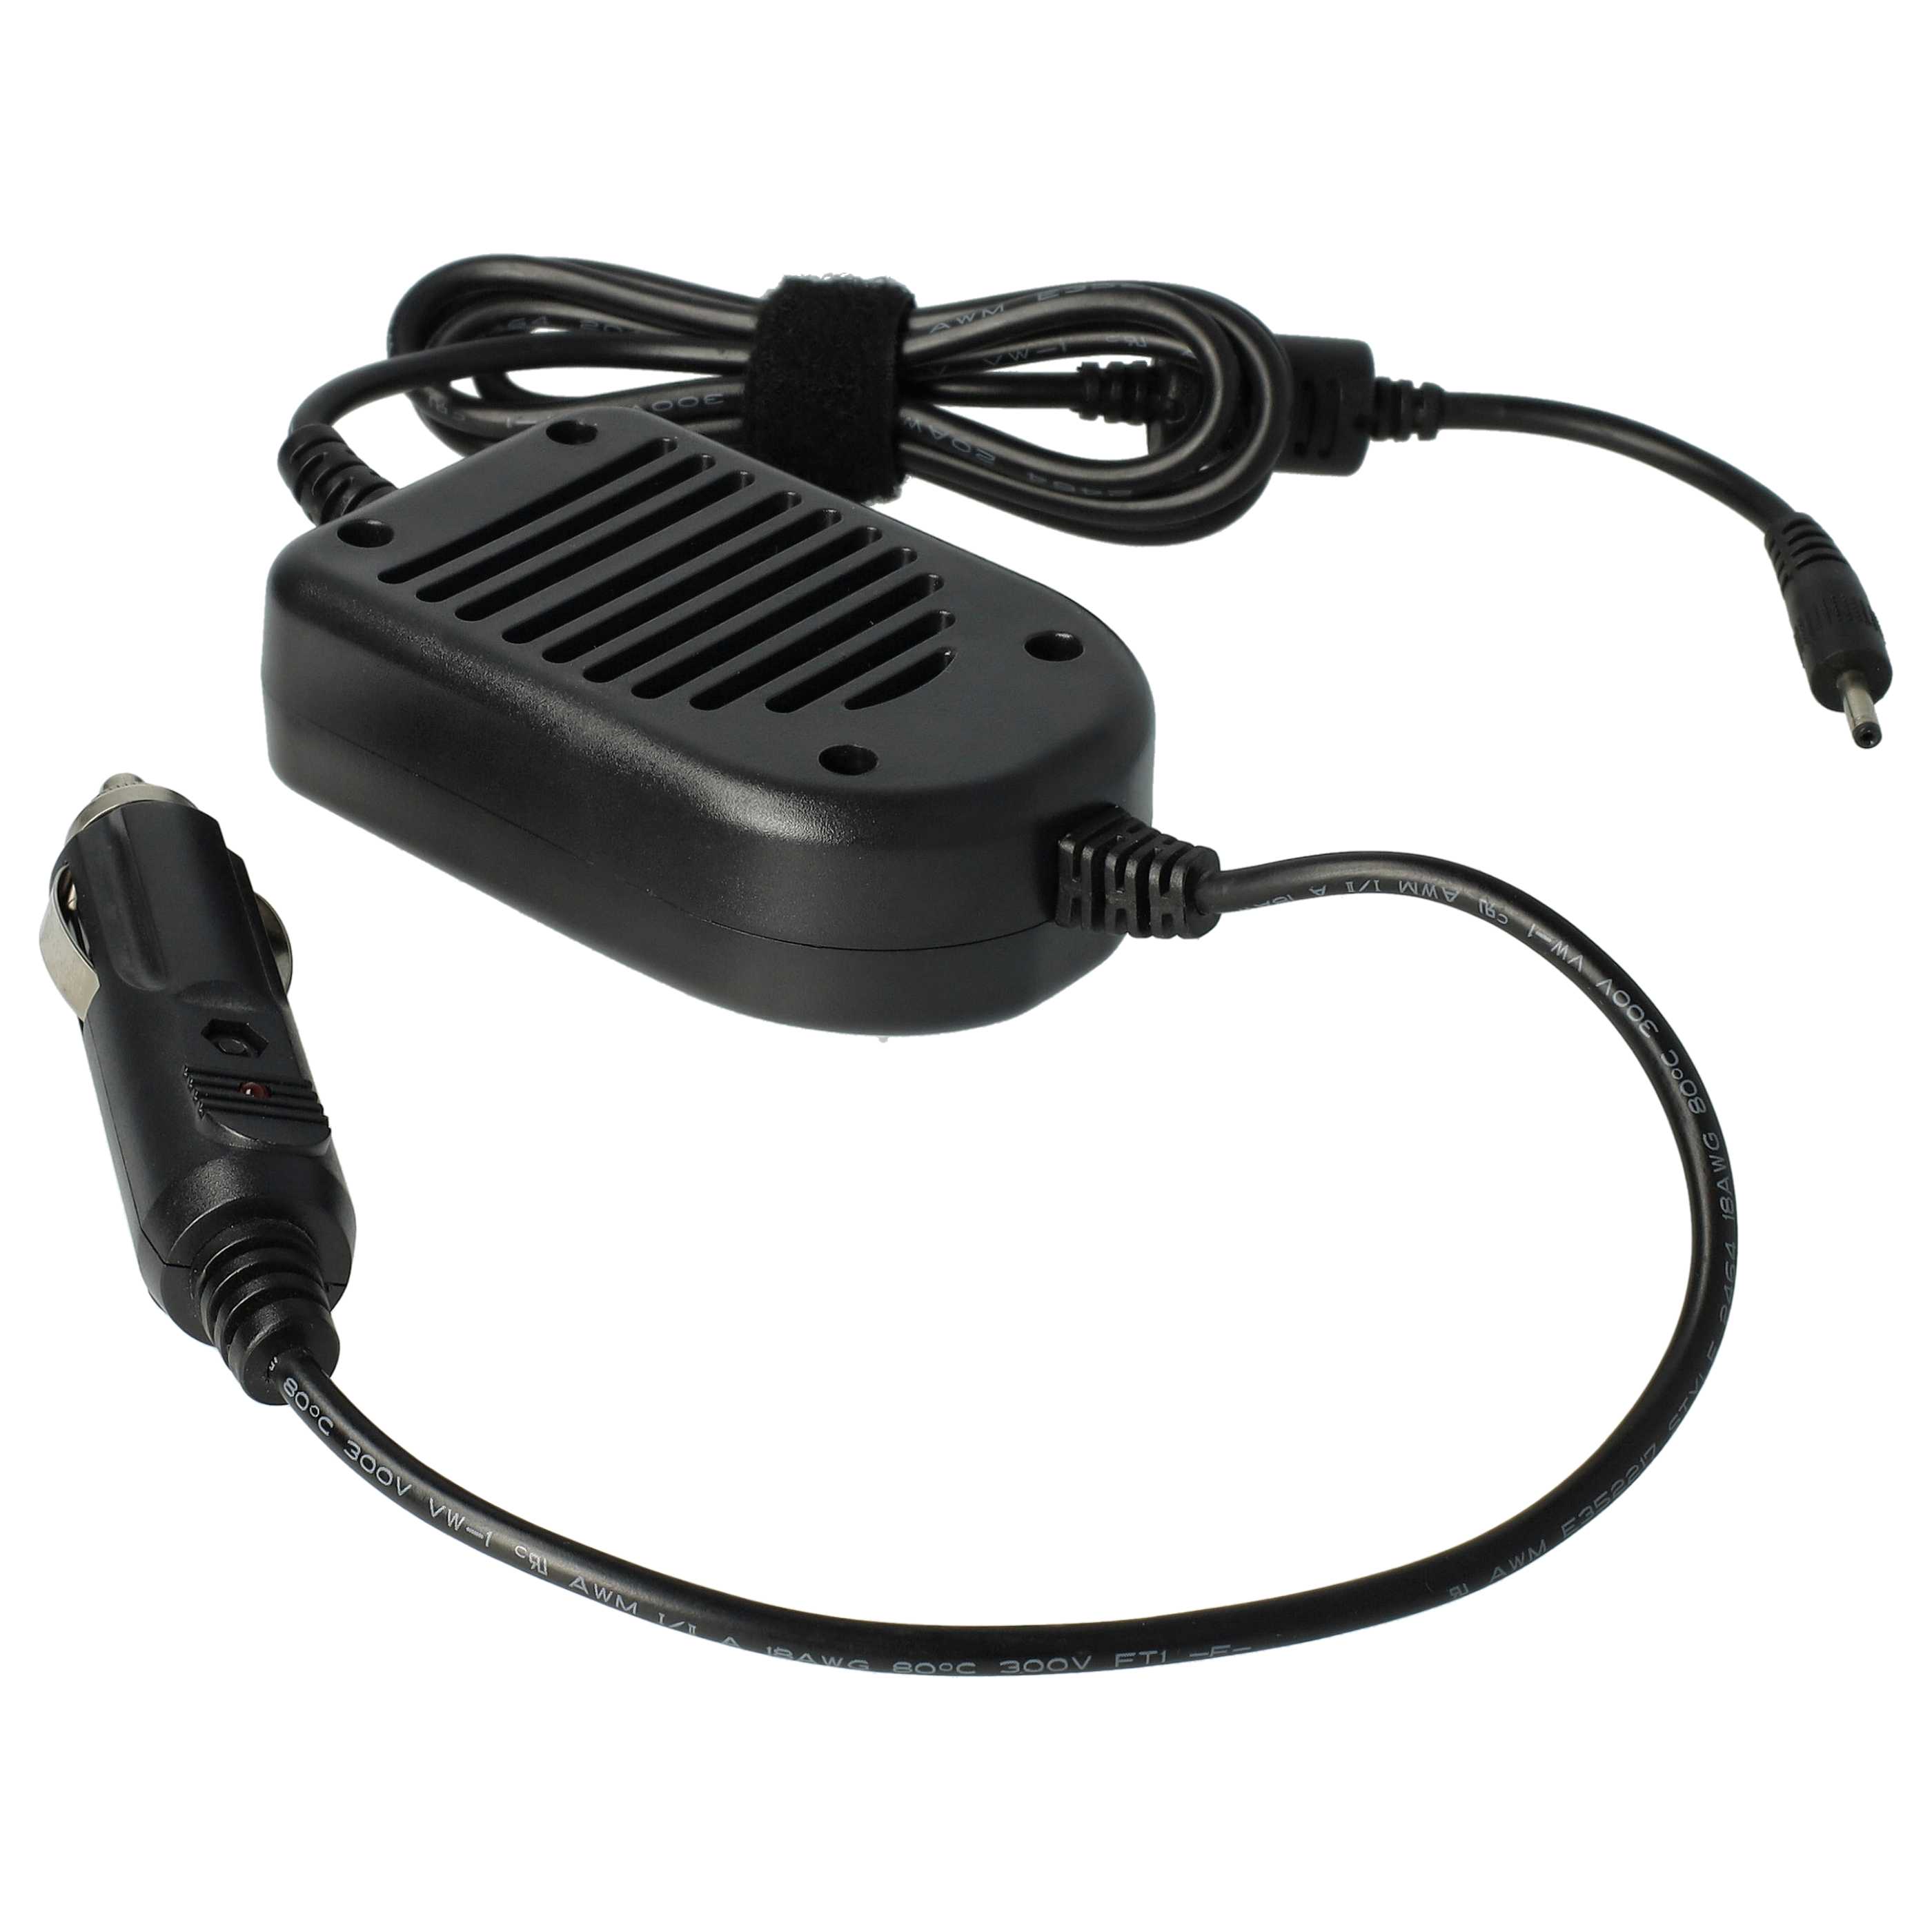 Vehicle Charger replaces Samsung AA-PA2N40L, AA-PA3NS40/US, AA-PA2N40S, AD-4019P, AD-4019 for Notebook - 2.1 A